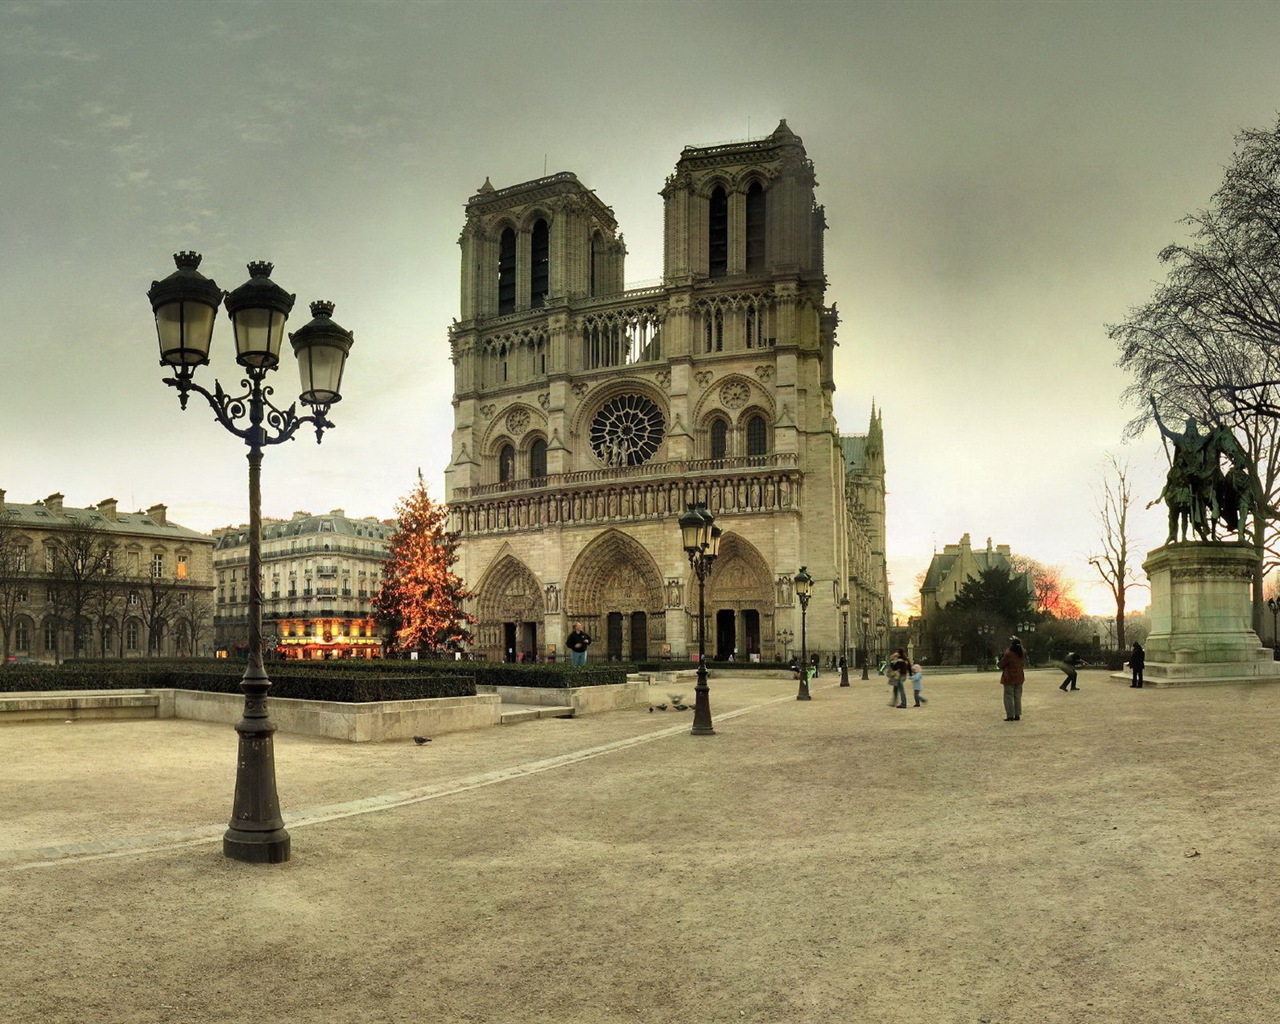 Notre Dame HD Wallpapers #6 - 1280x1024